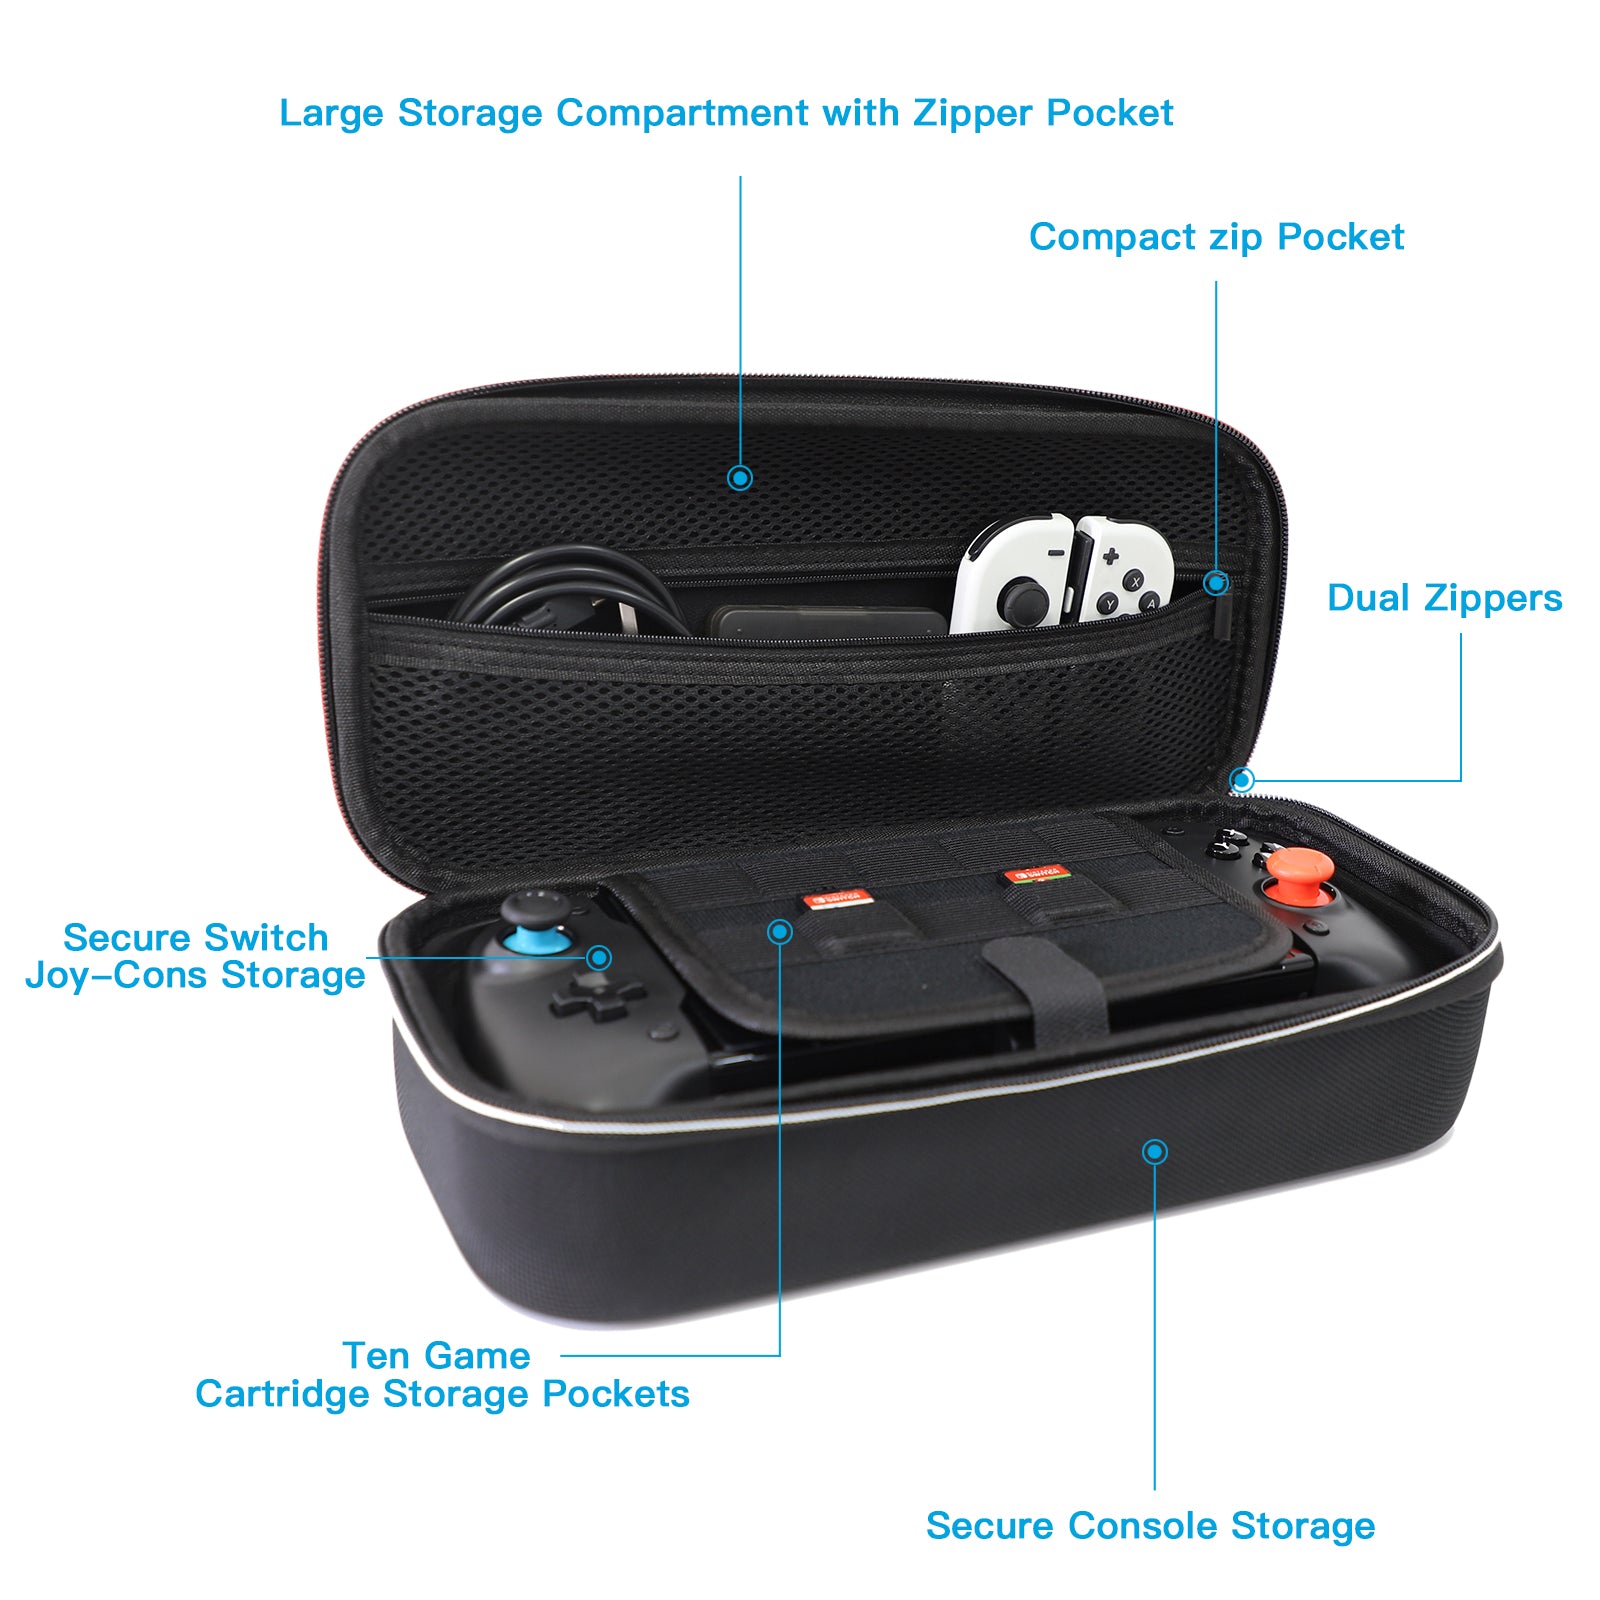 The carry case has dual zippers, 10-game cartridge pocket, compact zip pocket, and a zipper pocket. 